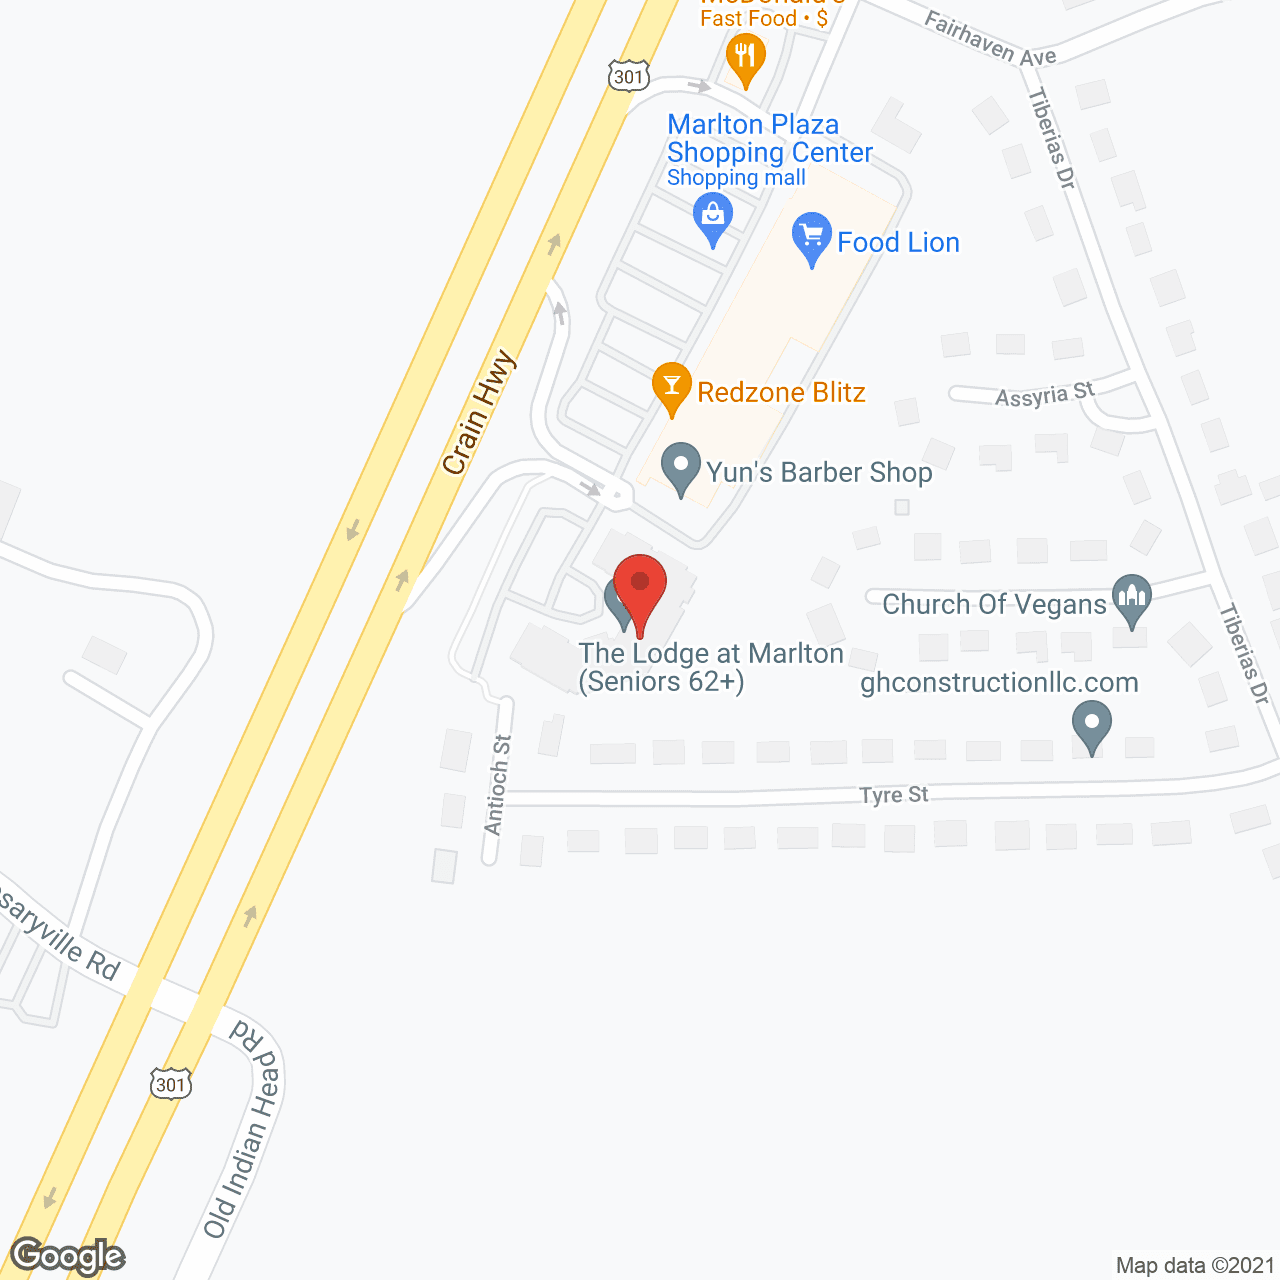 The Lodge at Marlton in google map